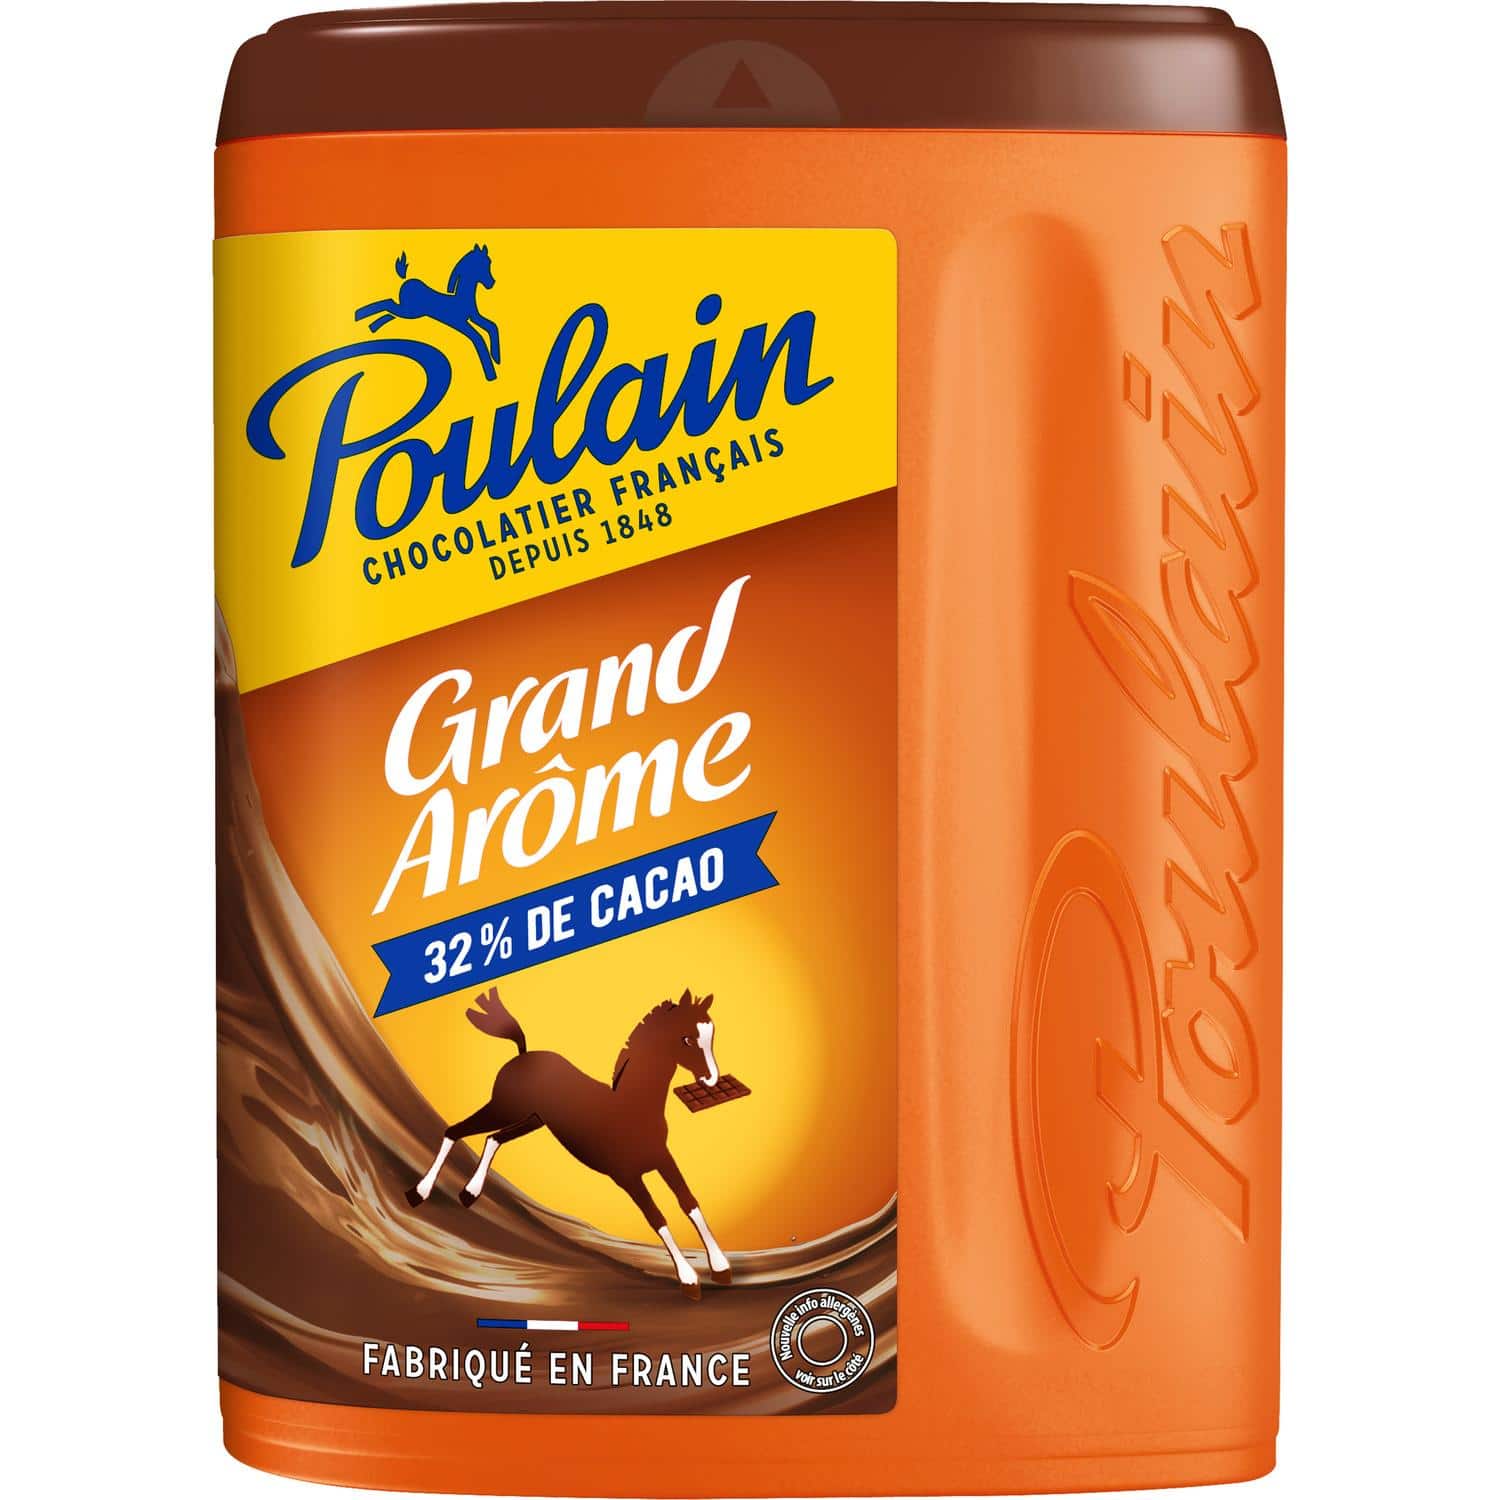 https://my-french-grocery.com/wp-content/uploads/2018/08/poulain-32-big.jpg